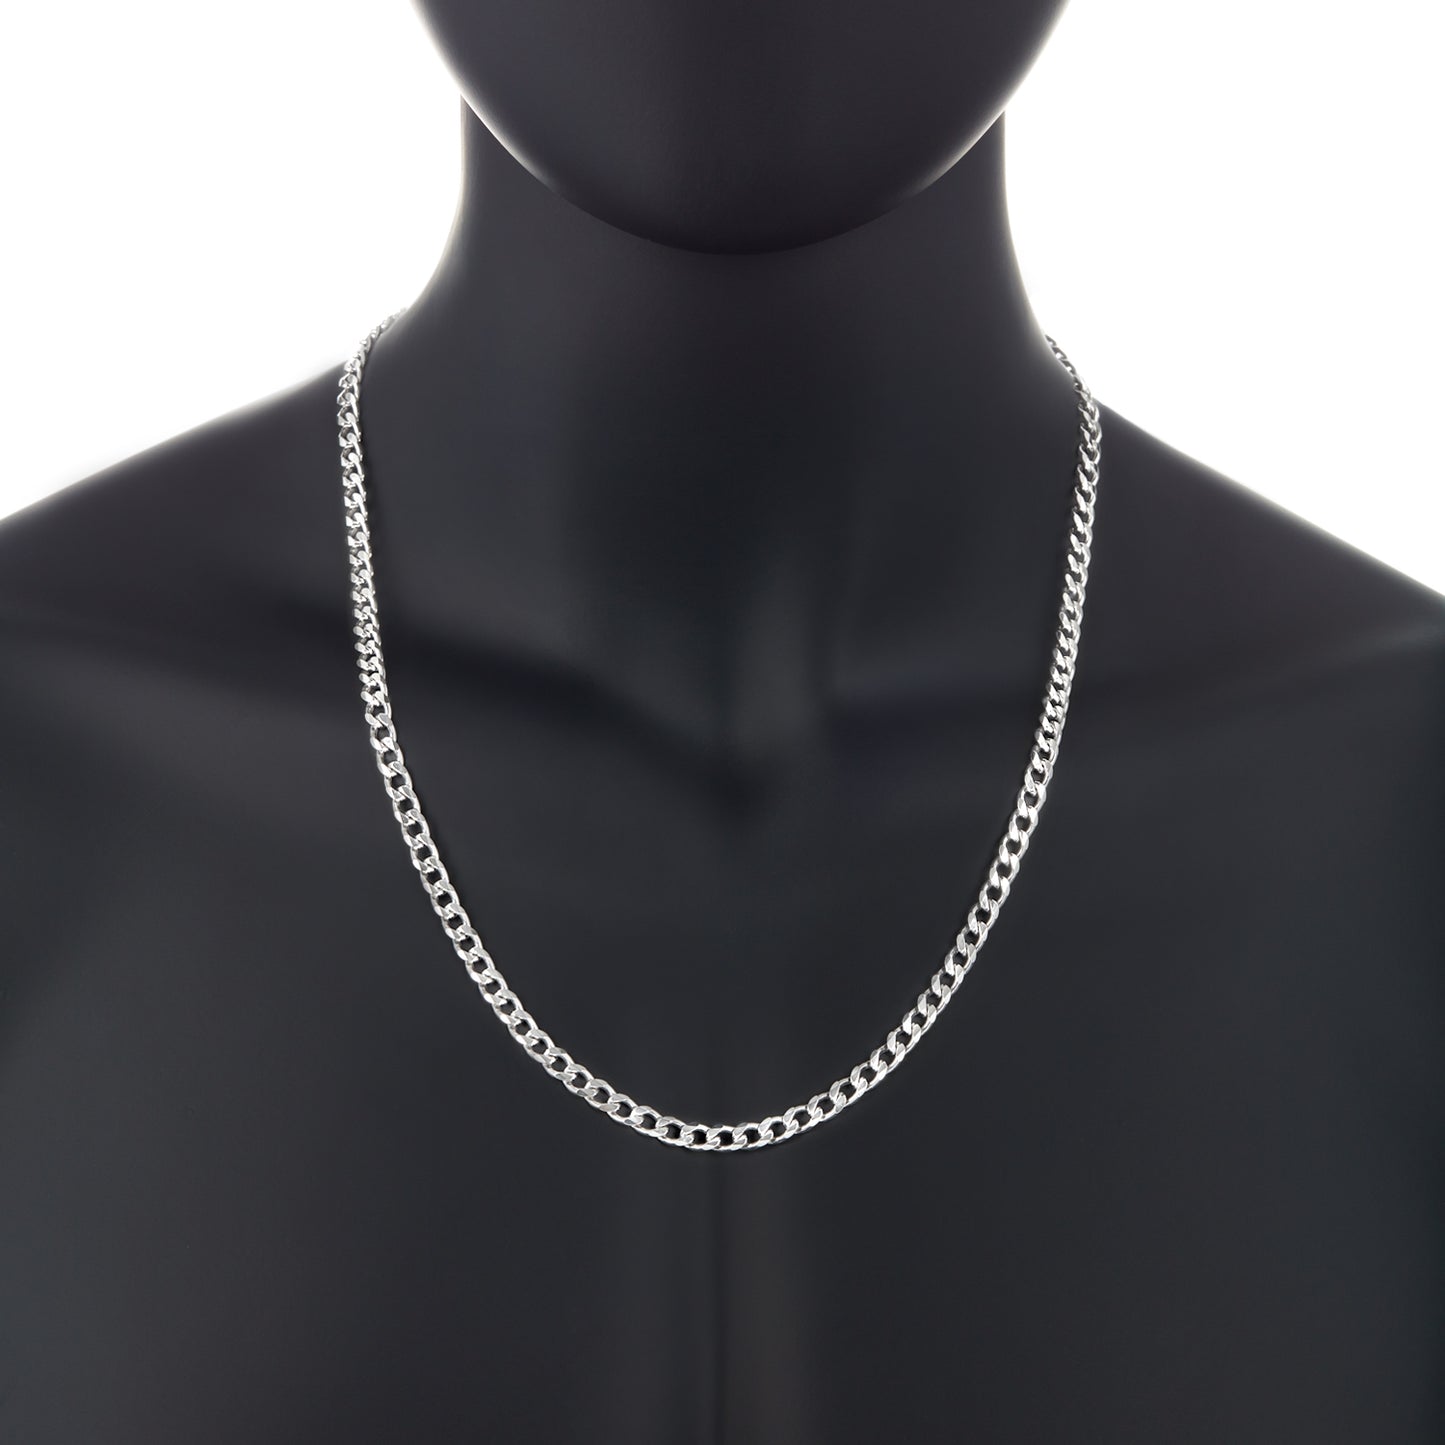 Men's 5mm Solid .925 Sterling Silver Beveled Curb Chain Necklace + Gift Box (SKU: NEC528-BX)